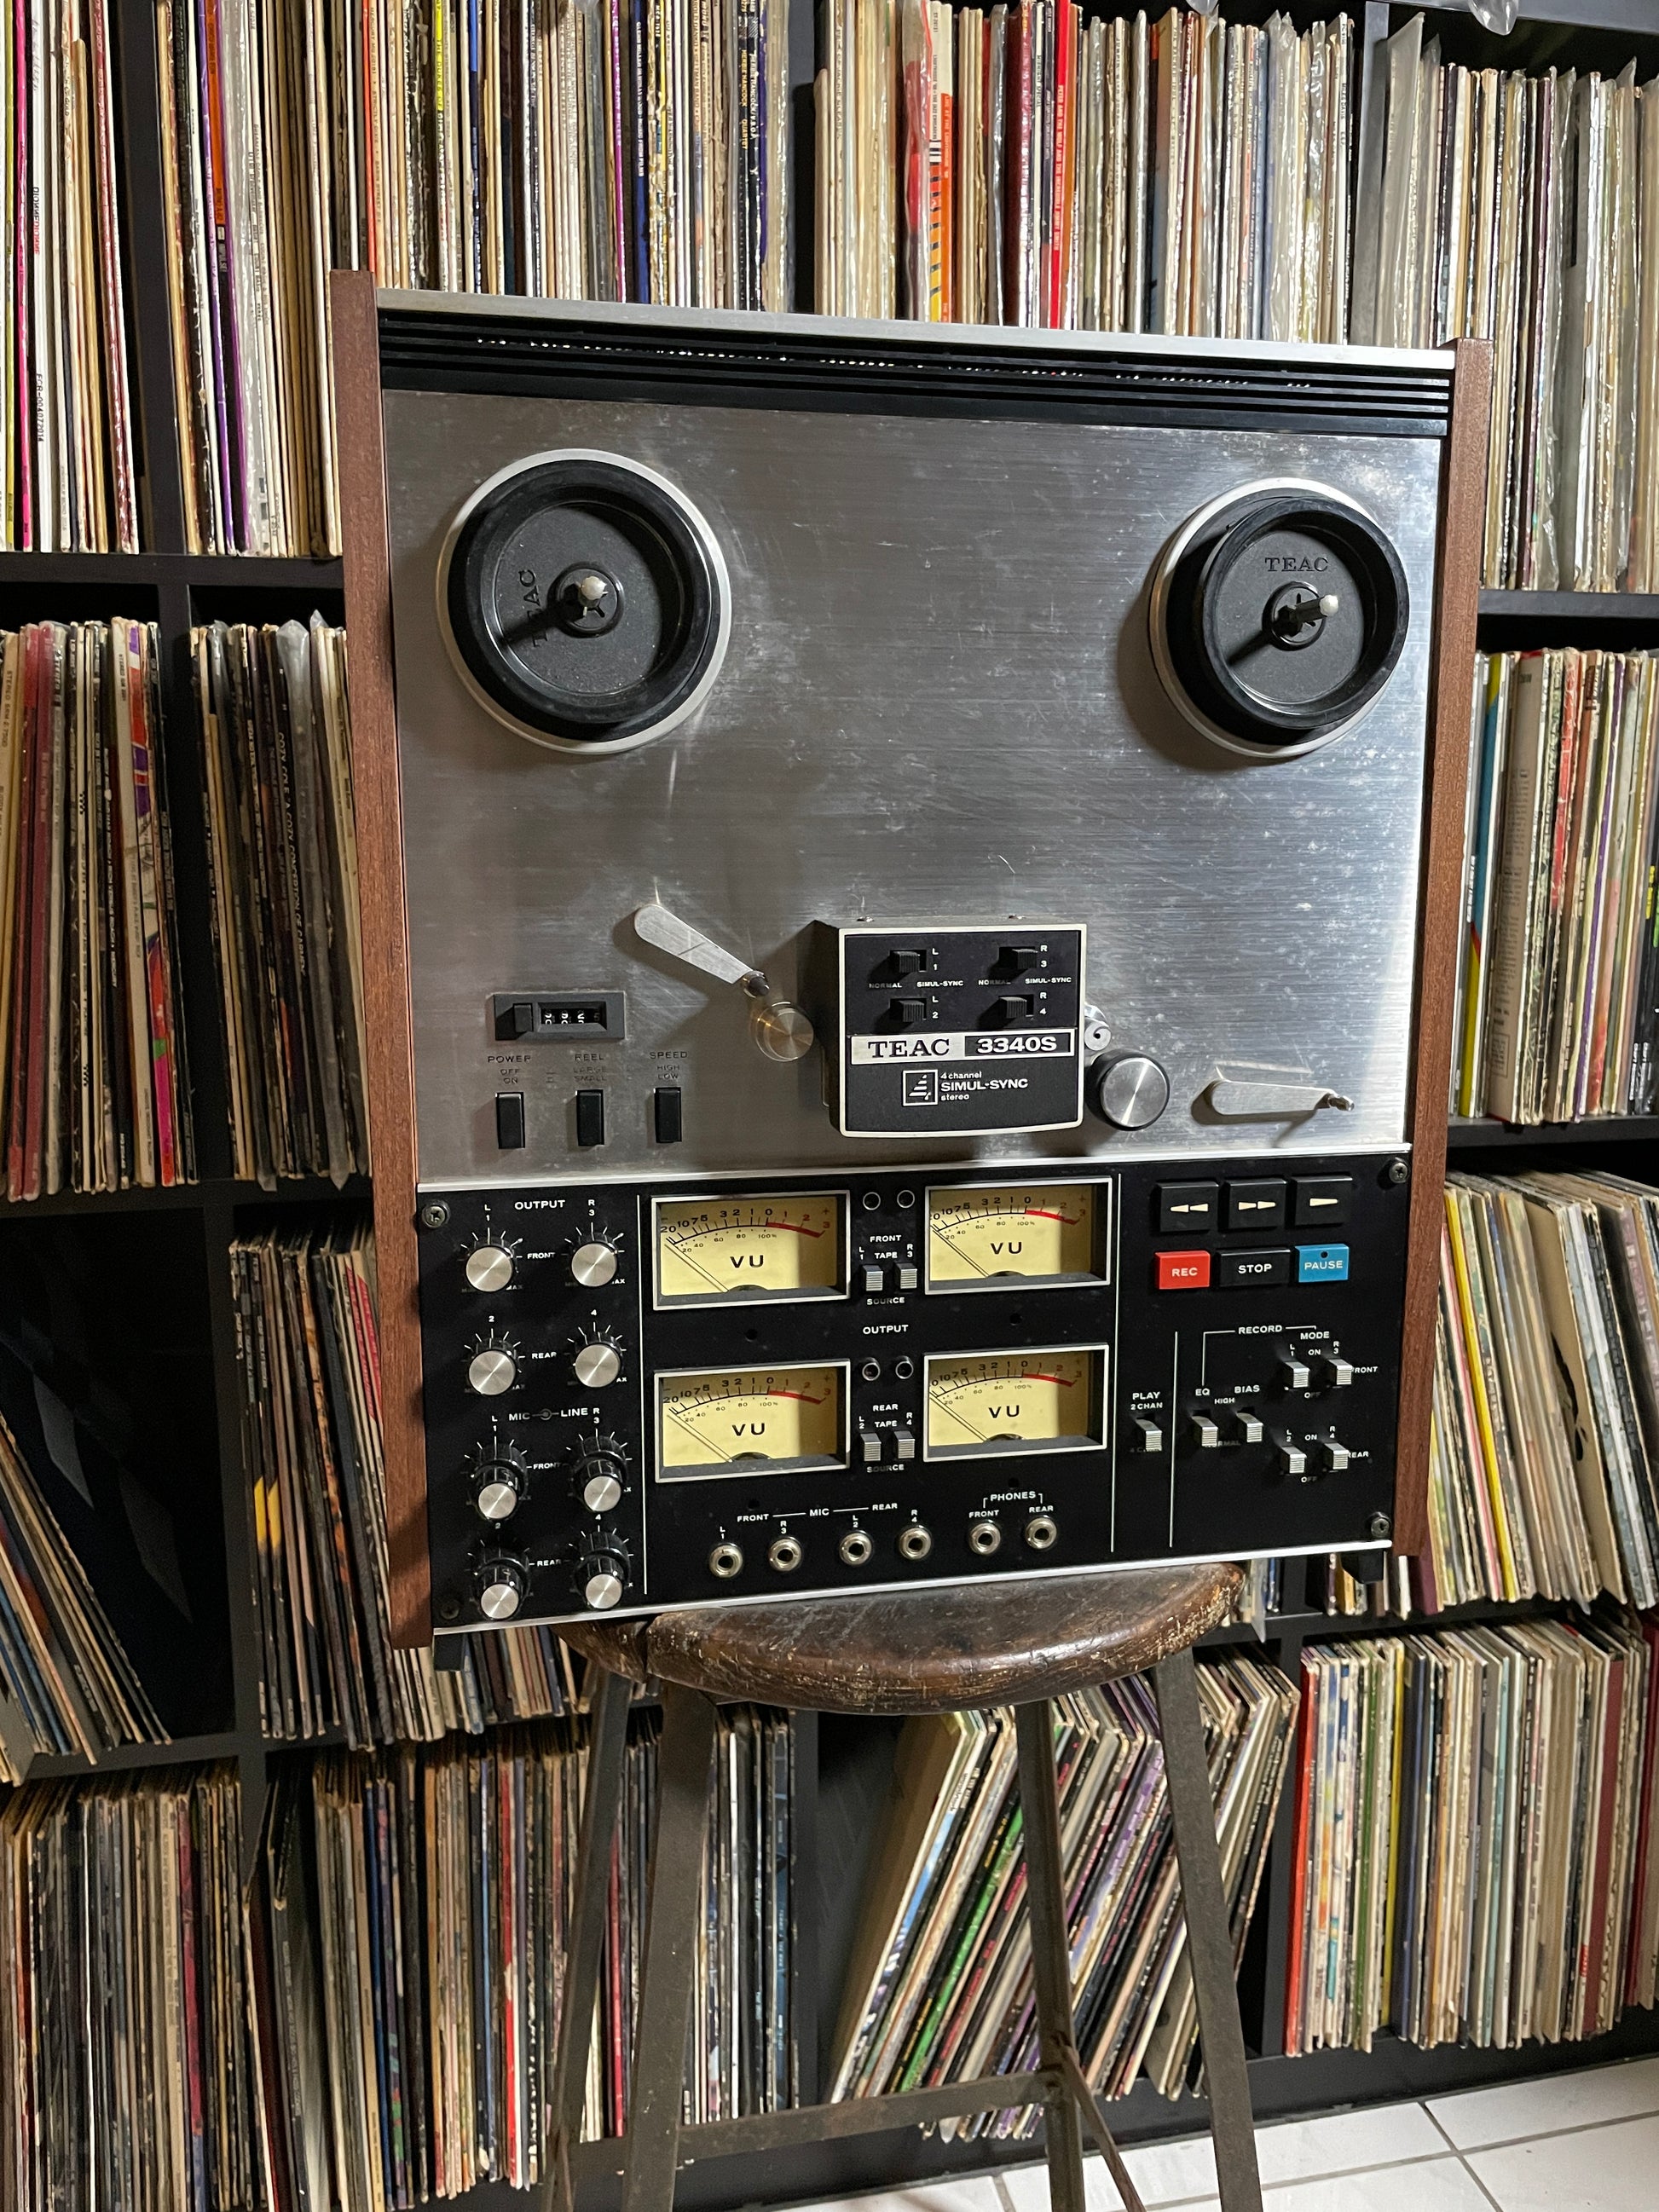 This TEAC 40-4 reel to reel tape machine from the early 1980s